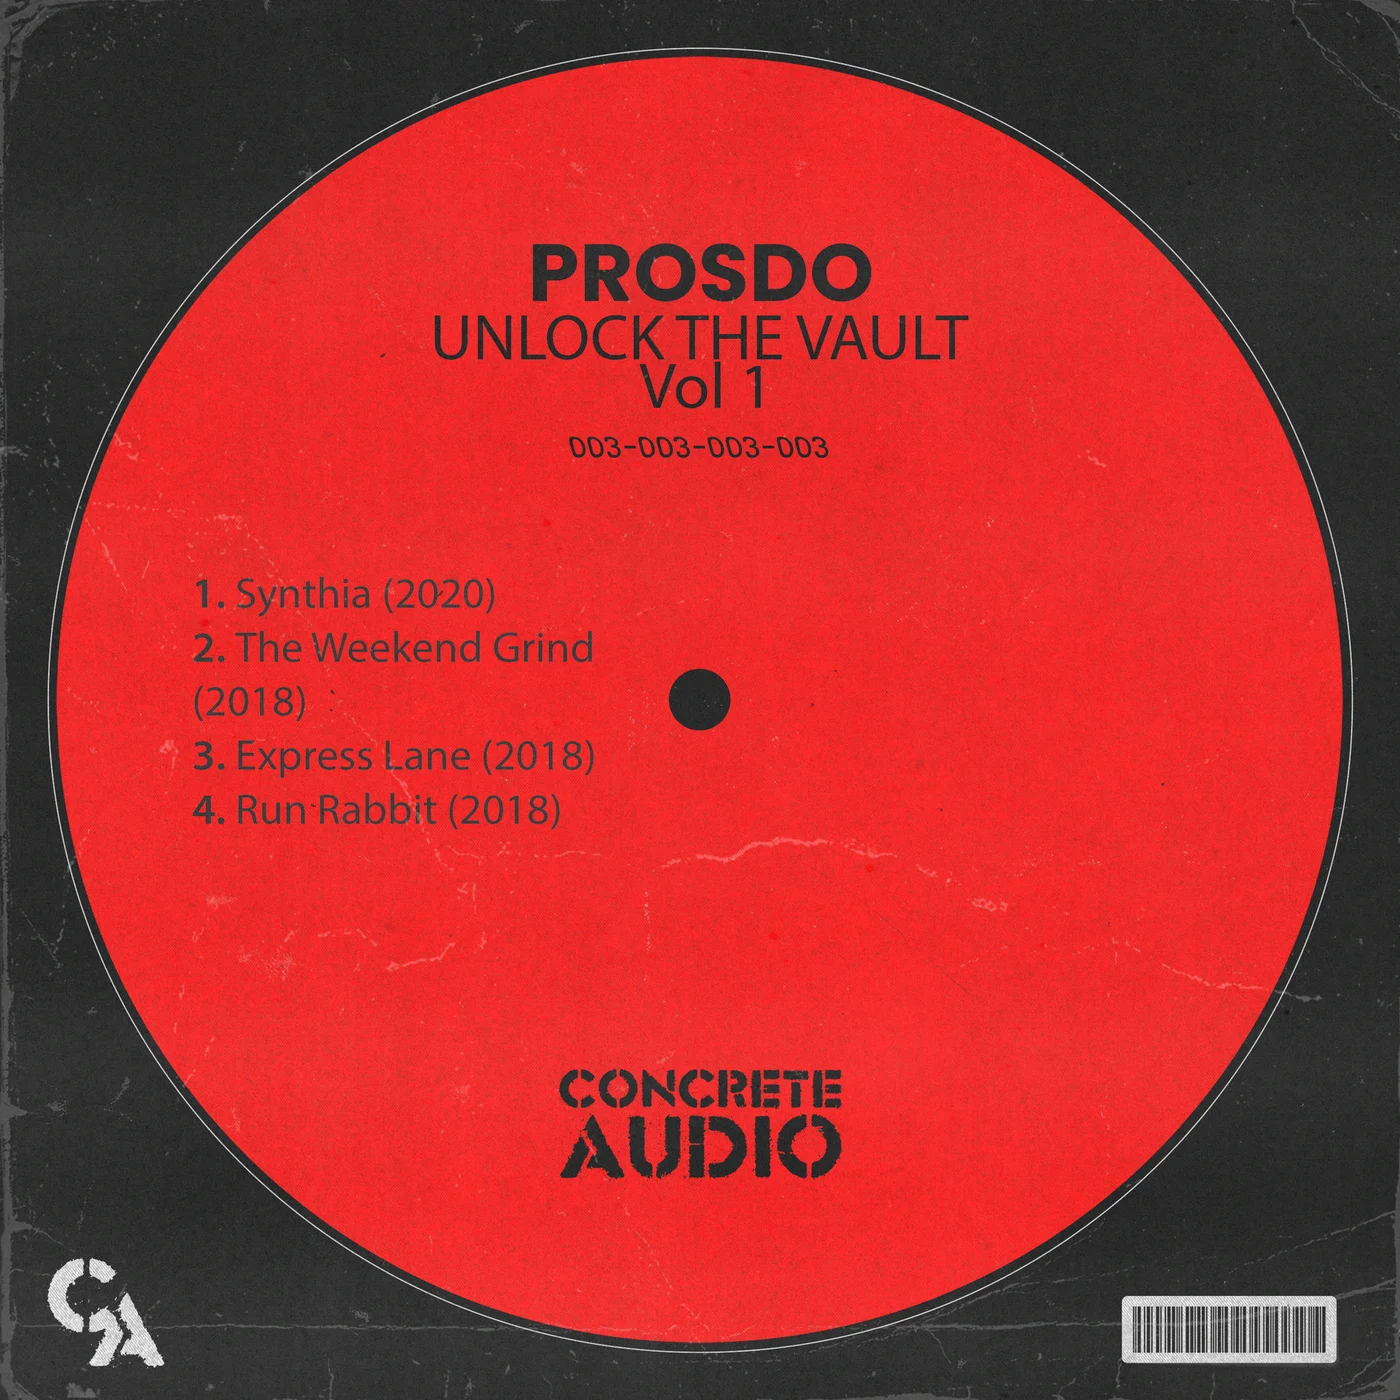 Prosdo delivers your four exclusive tracks from his Vault